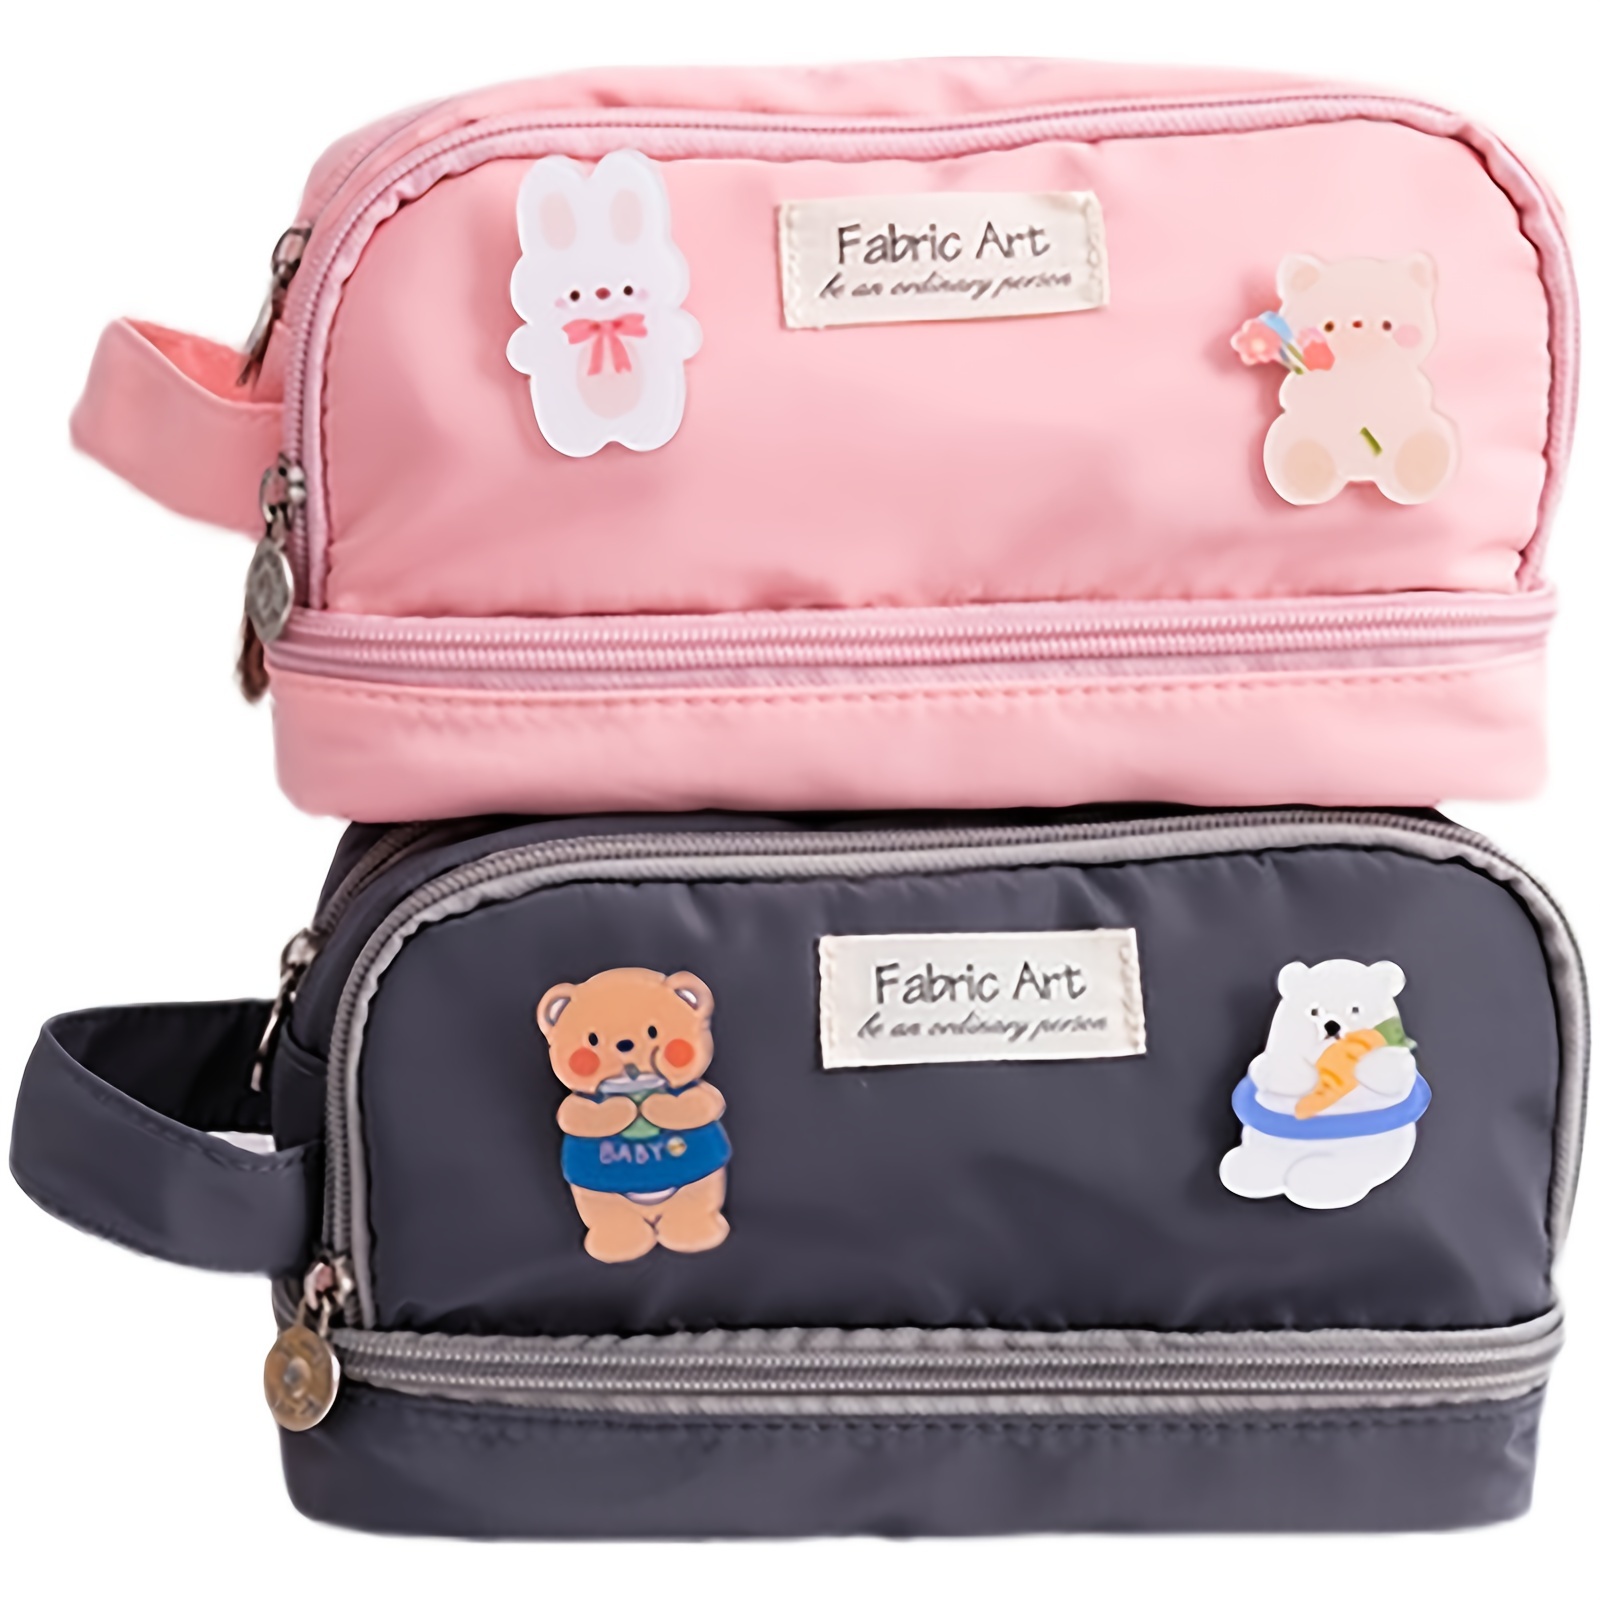 Wholesale Large Capacity Multi Layer Korean Cute Pencil Cases For Students  Aesthetic School Box With Kawaii Stationery Rack From Deng10, $10.36